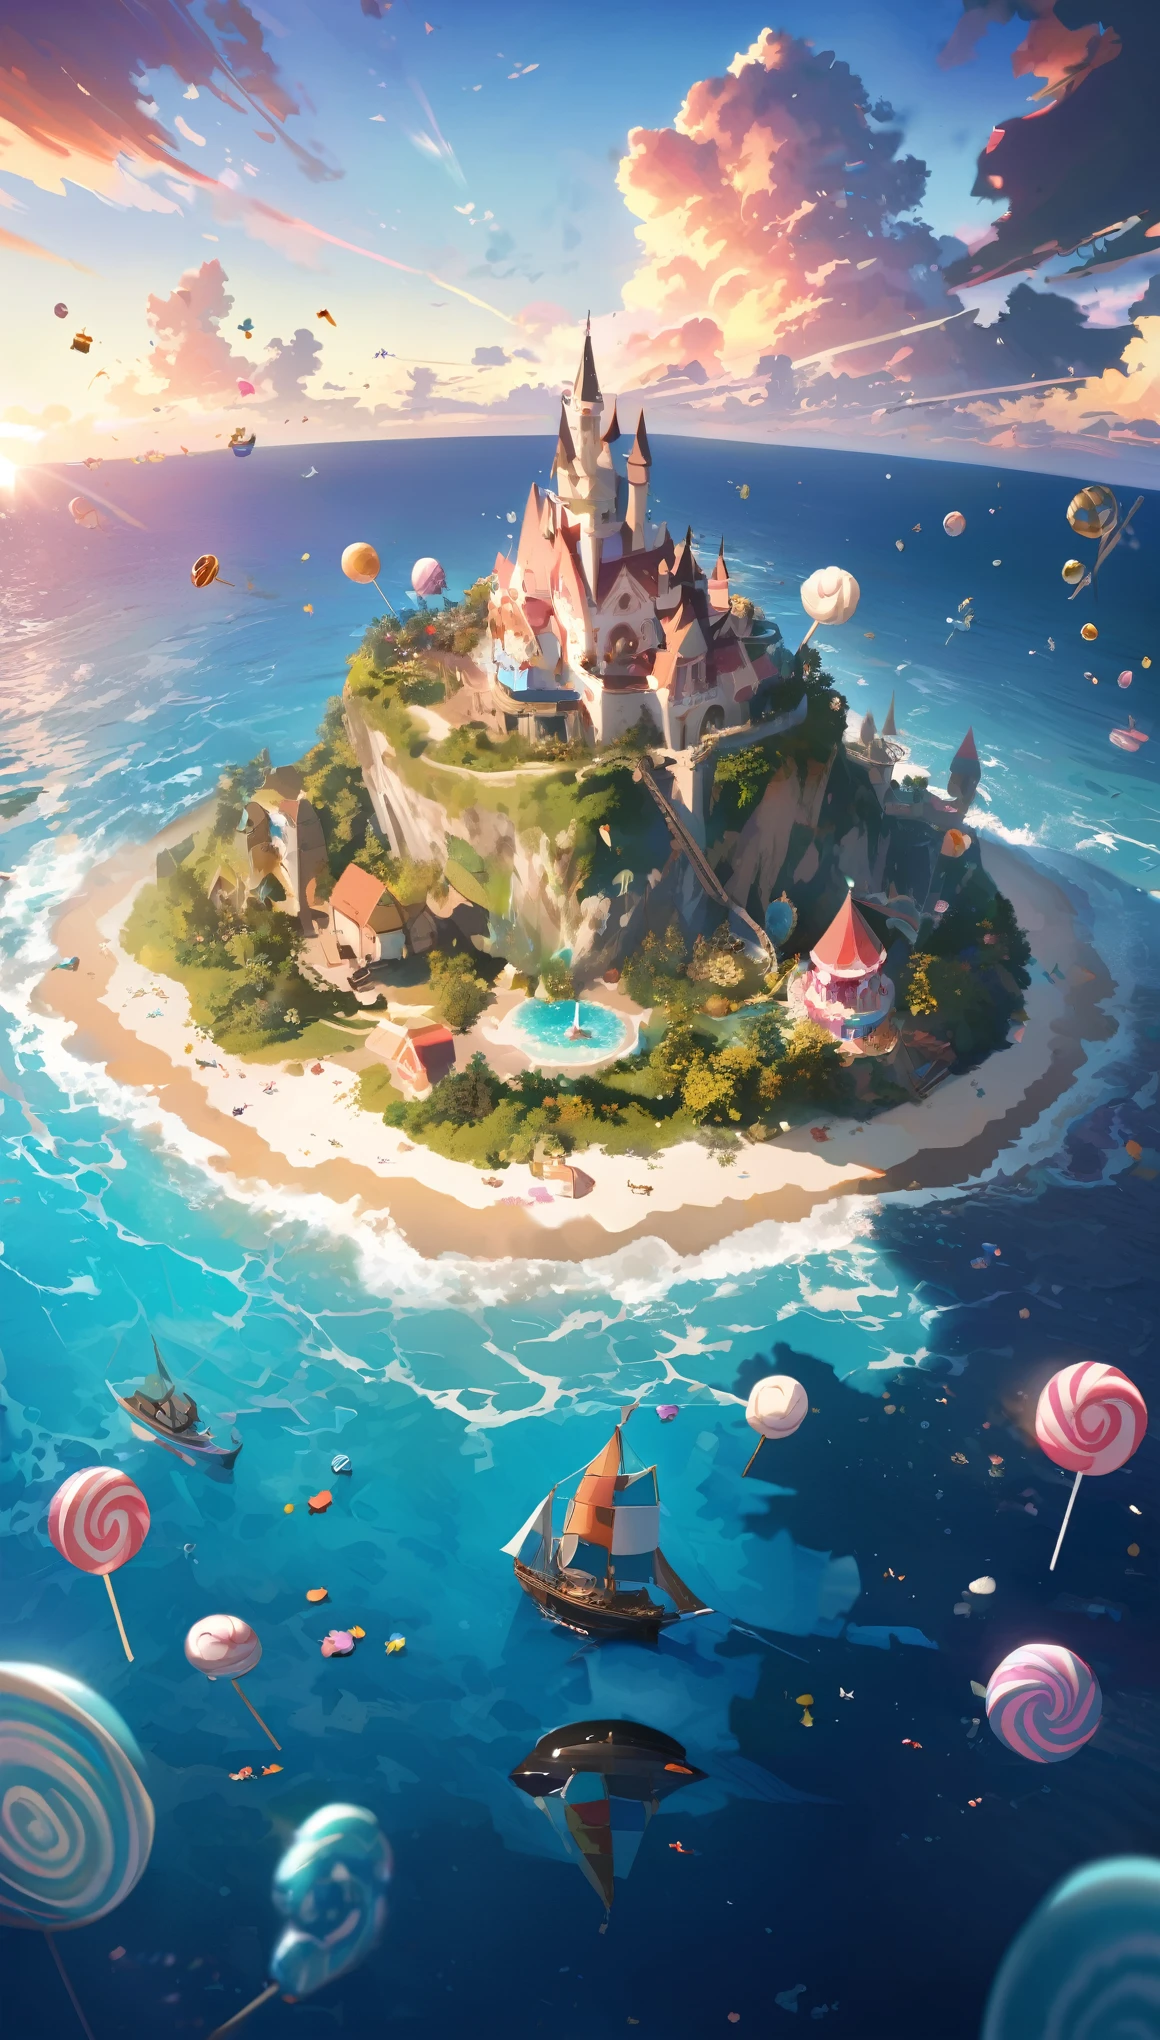 70 mm lens, cinematic shot, centered, perfect angle, {isometric island kingdom full of sweets and cakes (lollipop, whipped cream), middle of the ocean, celebration, fantasy, surreal, epic fantasy, dreamland}, children dream, (Detailed, finest detailed, ultra detailed, intricate), vibrant color, volumetric lighting, dynamic lighting, depth of field, hard shadow, reflection, sharp focus, HD, UHD, 64K, 128K, masterpiece, professional work.